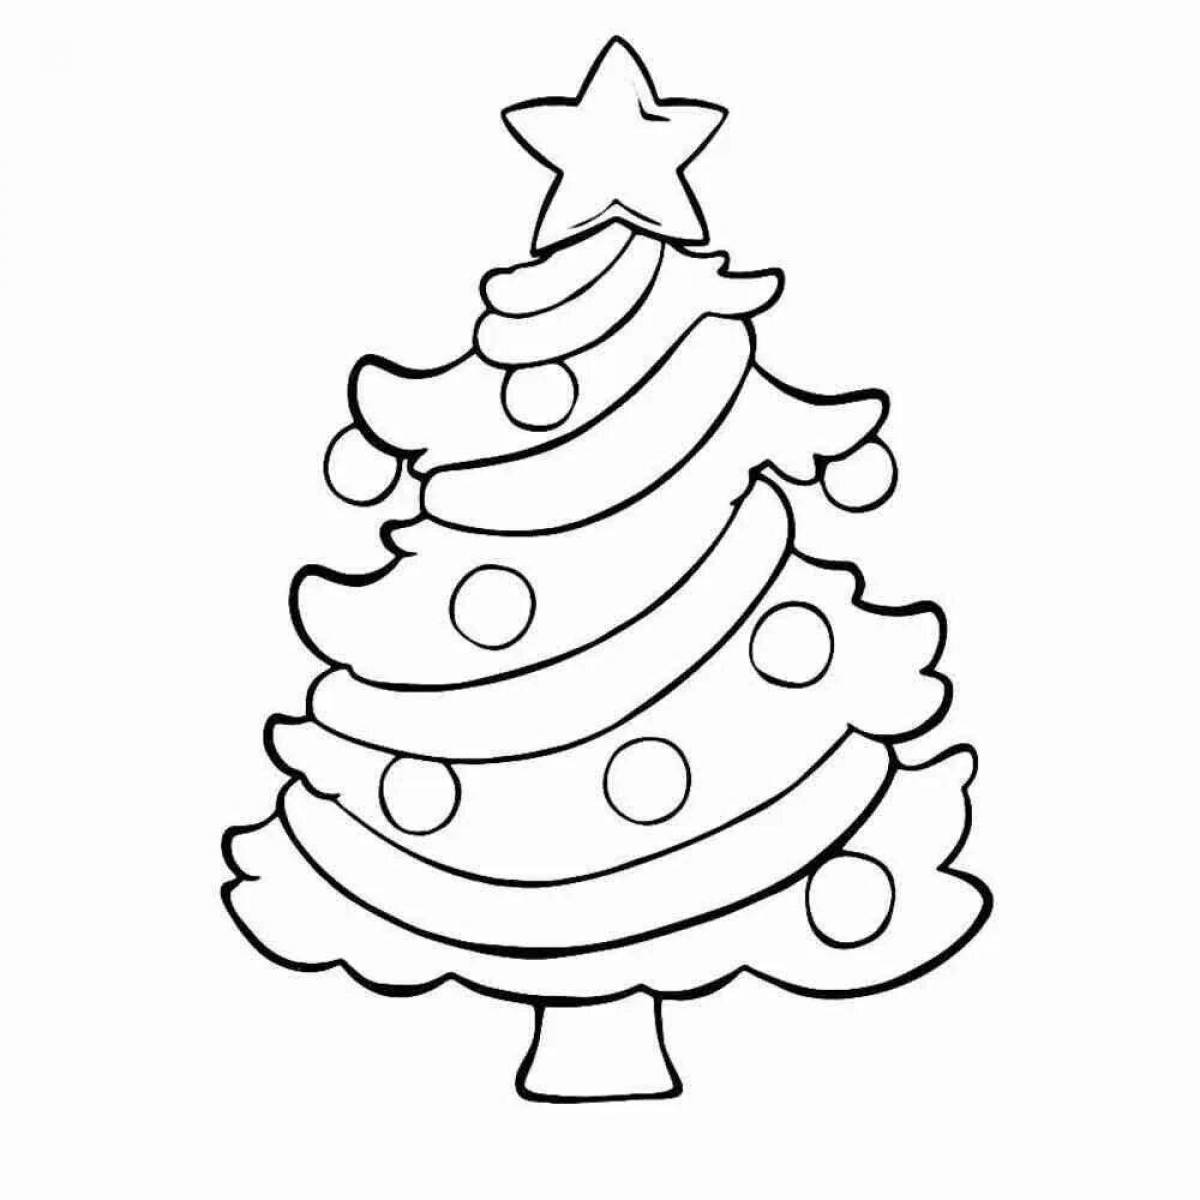 Fancy Christmas tree picture for kids